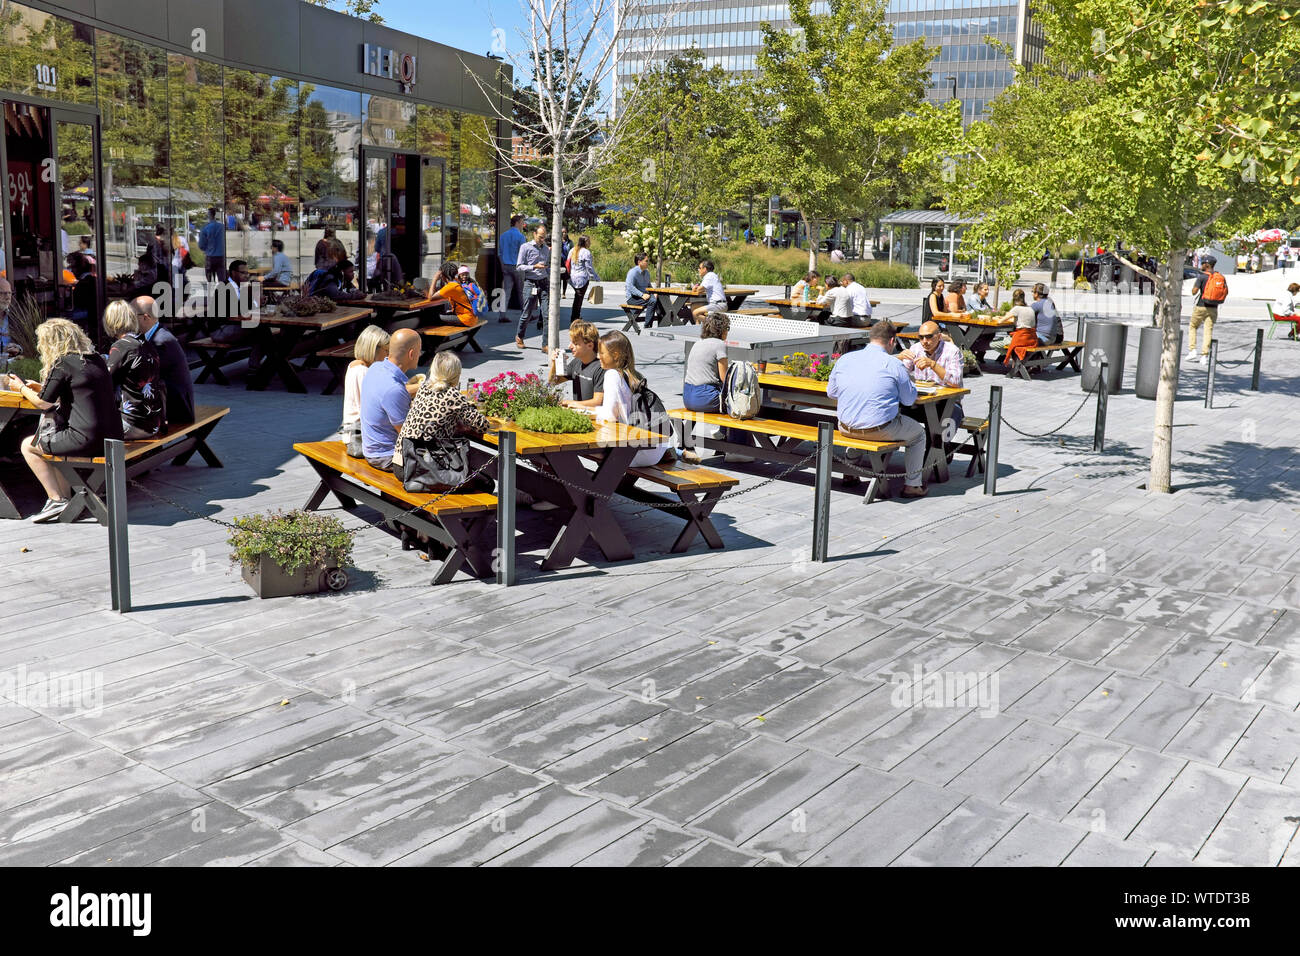 Rebol, a health-oriented cafe known for its organic, non-GMO menu, is a popular place to eat outdoors in the summer on Public Square in Cleveland, OH. Stock Photo